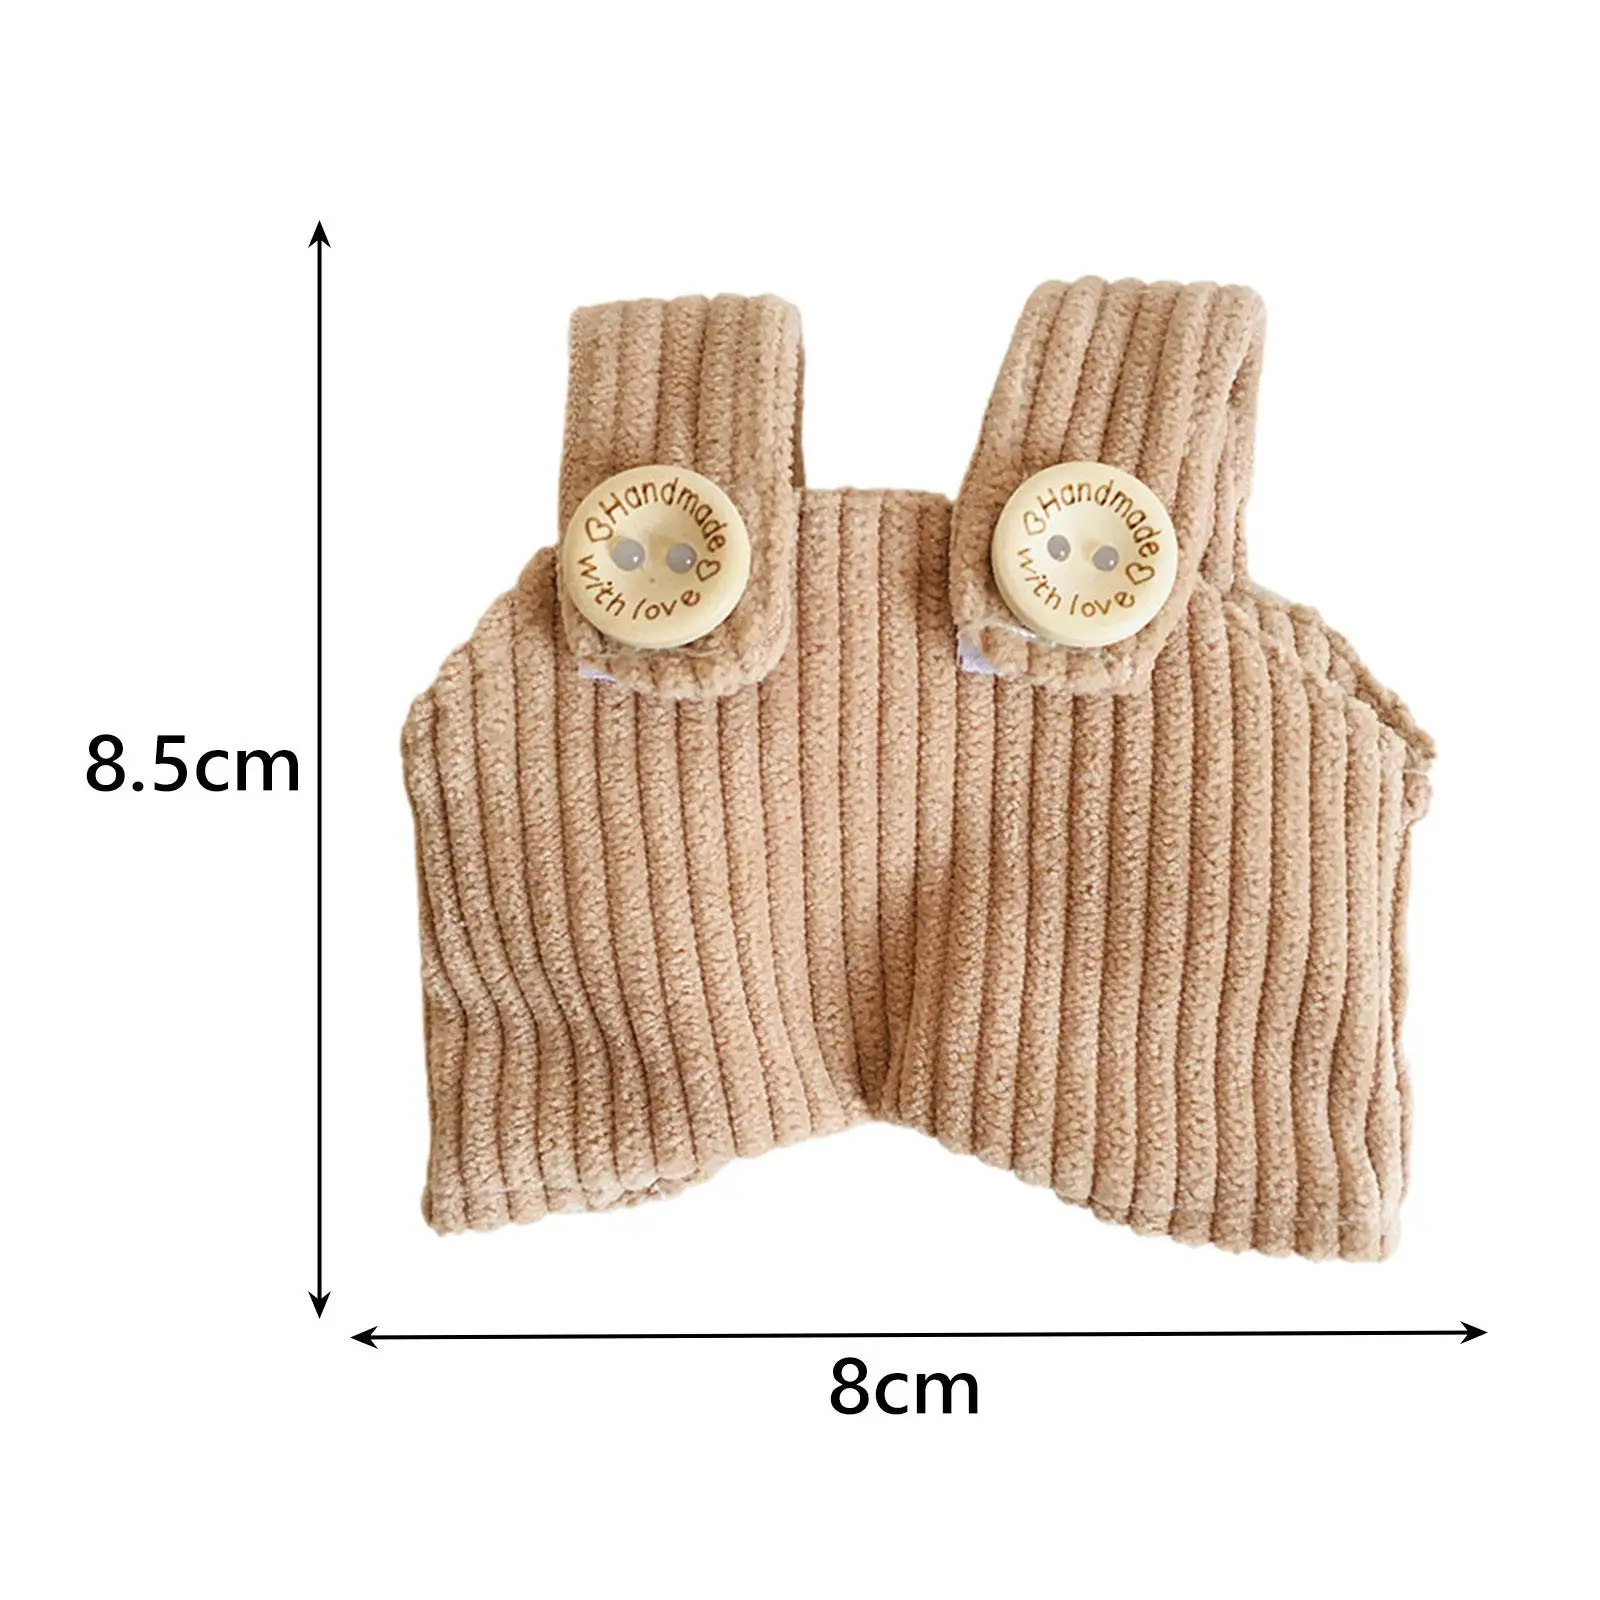 Dolls Suspender Pants Doll Clothes Costume Accessory for 6